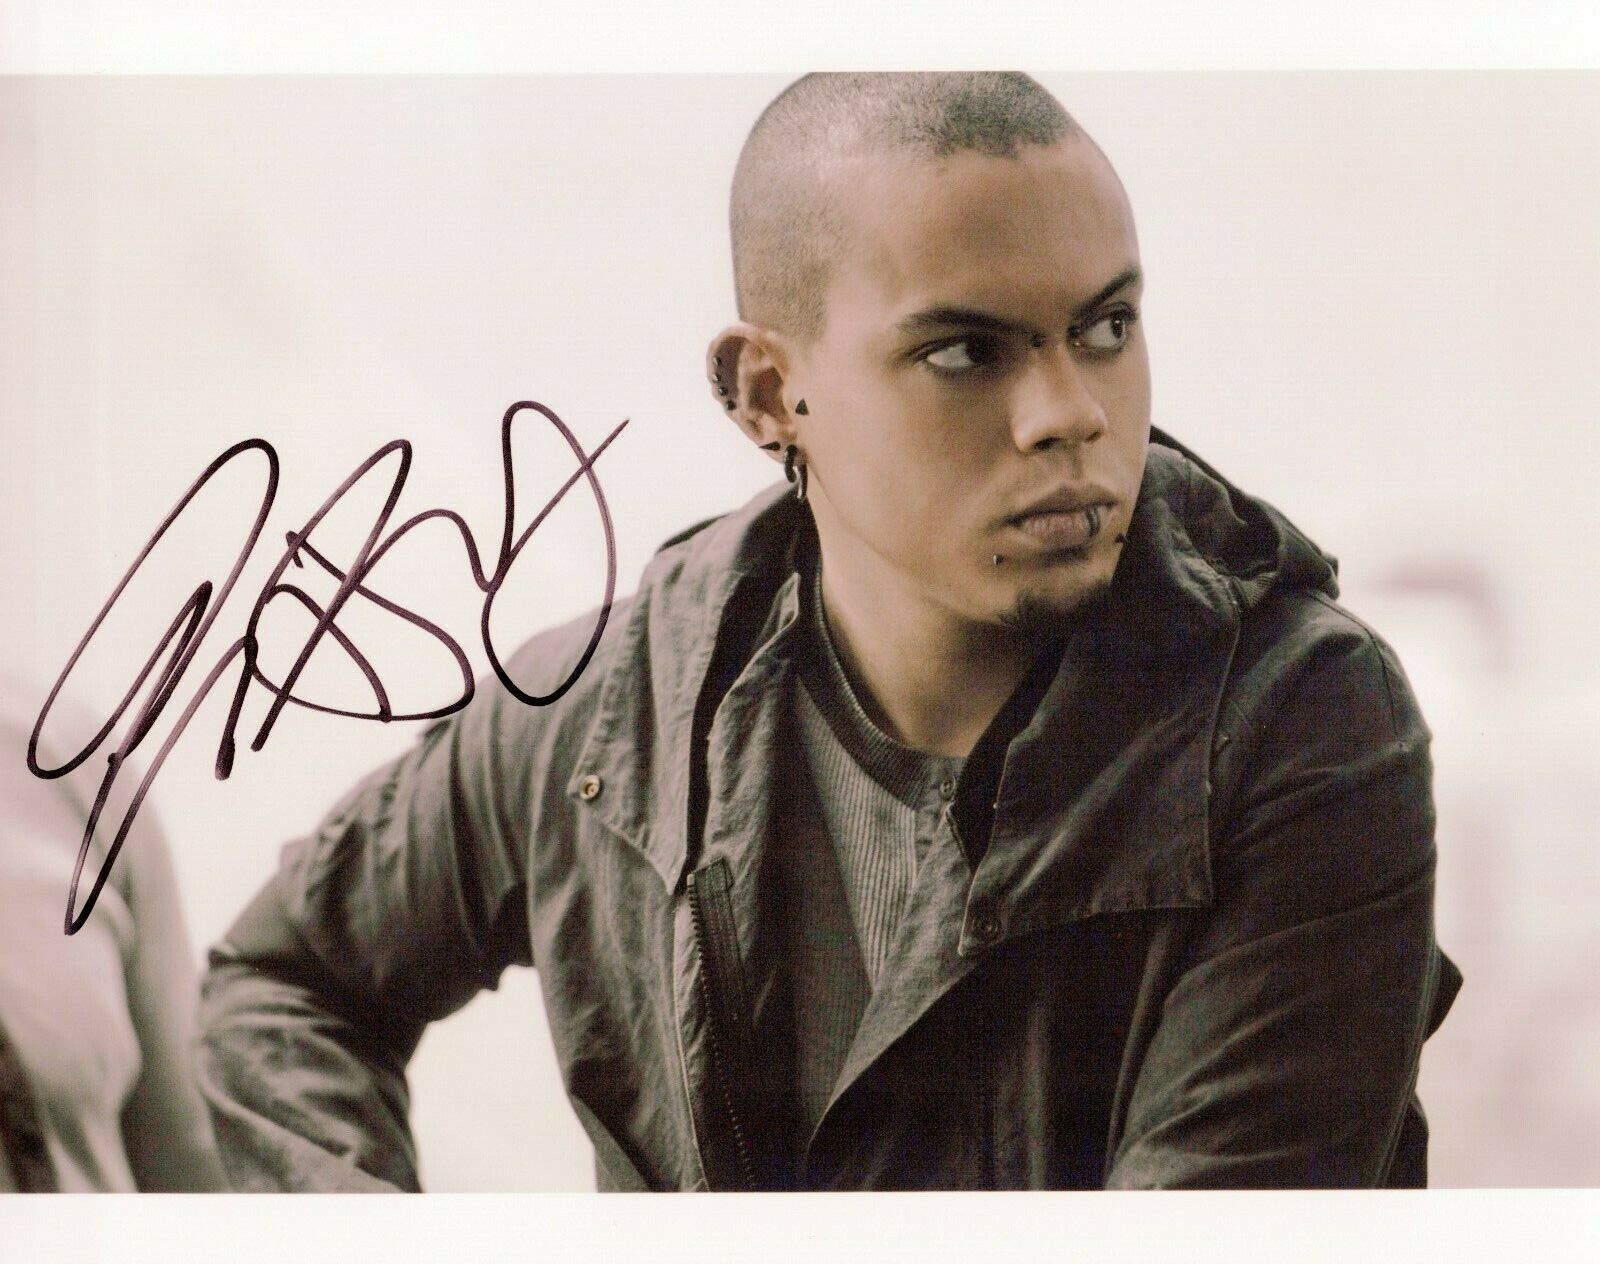 Evan Ross The Hunger Games MJ 2 autographed Photo Poster painting signed 8x10 #3 Messalla